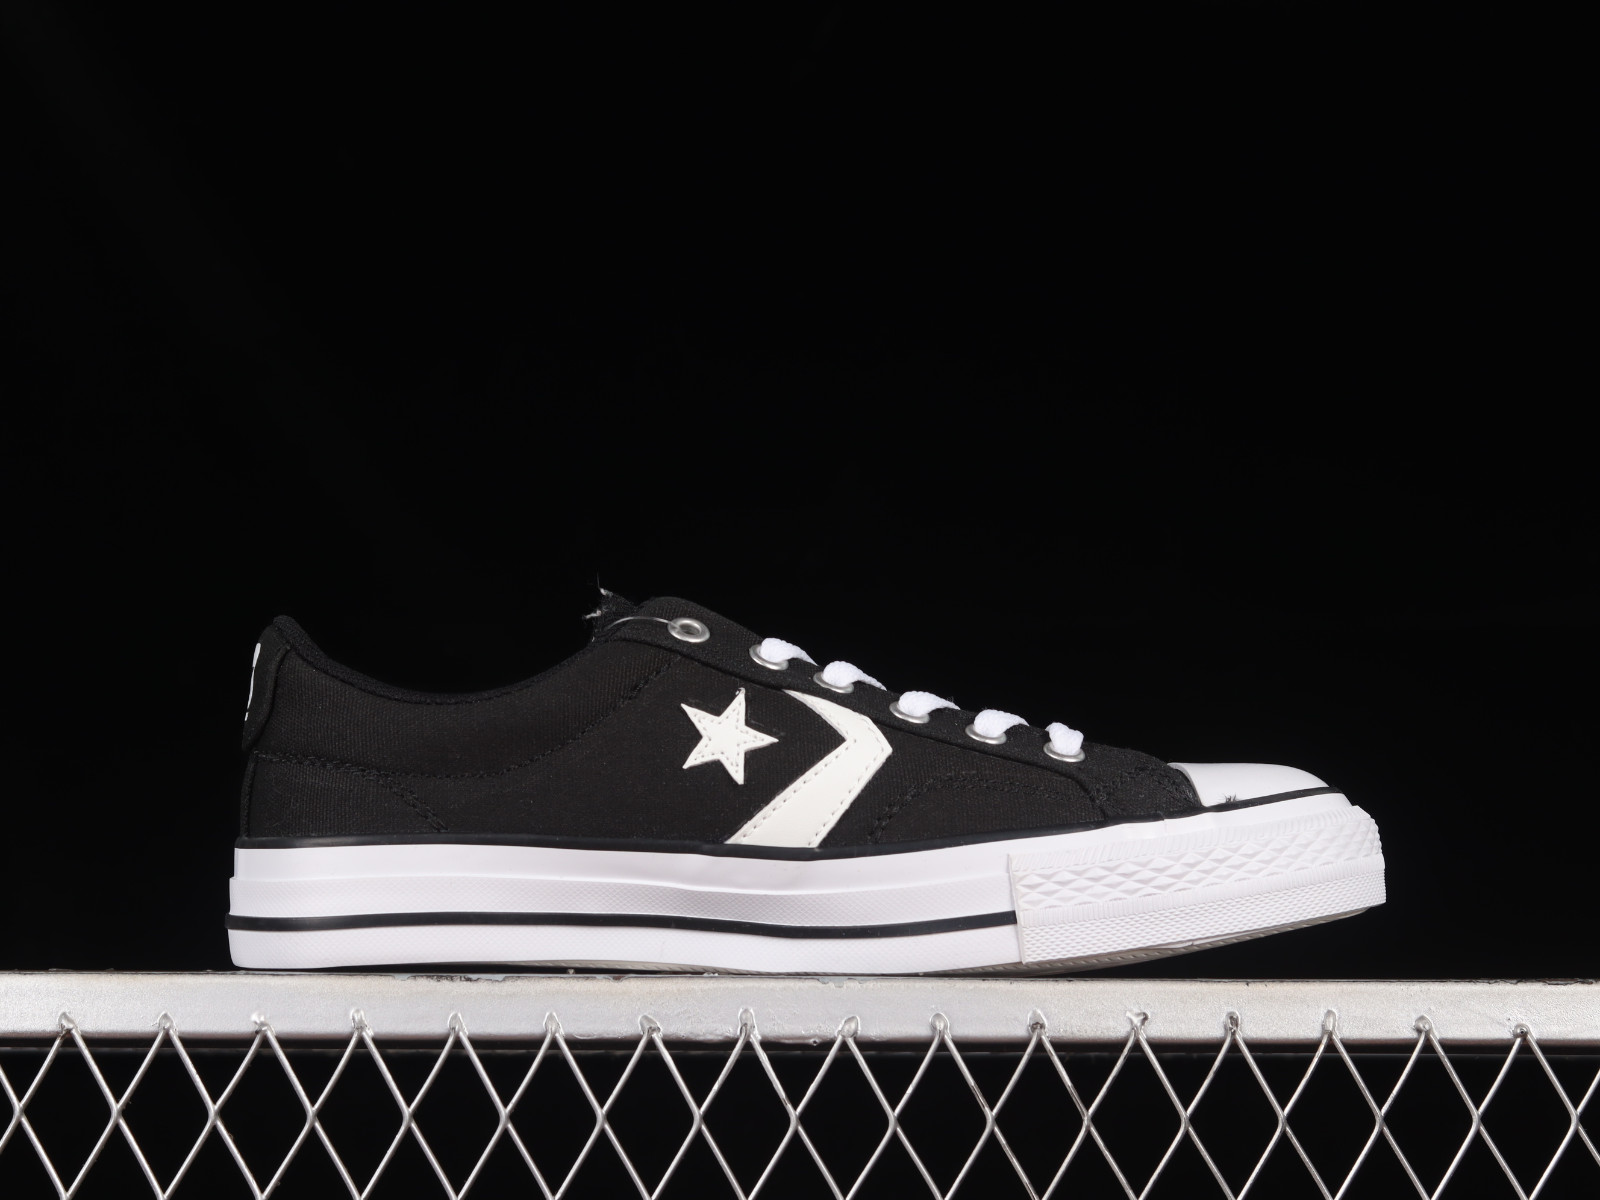 Converse Chuck Taylor All Star Low Black White 161595C -